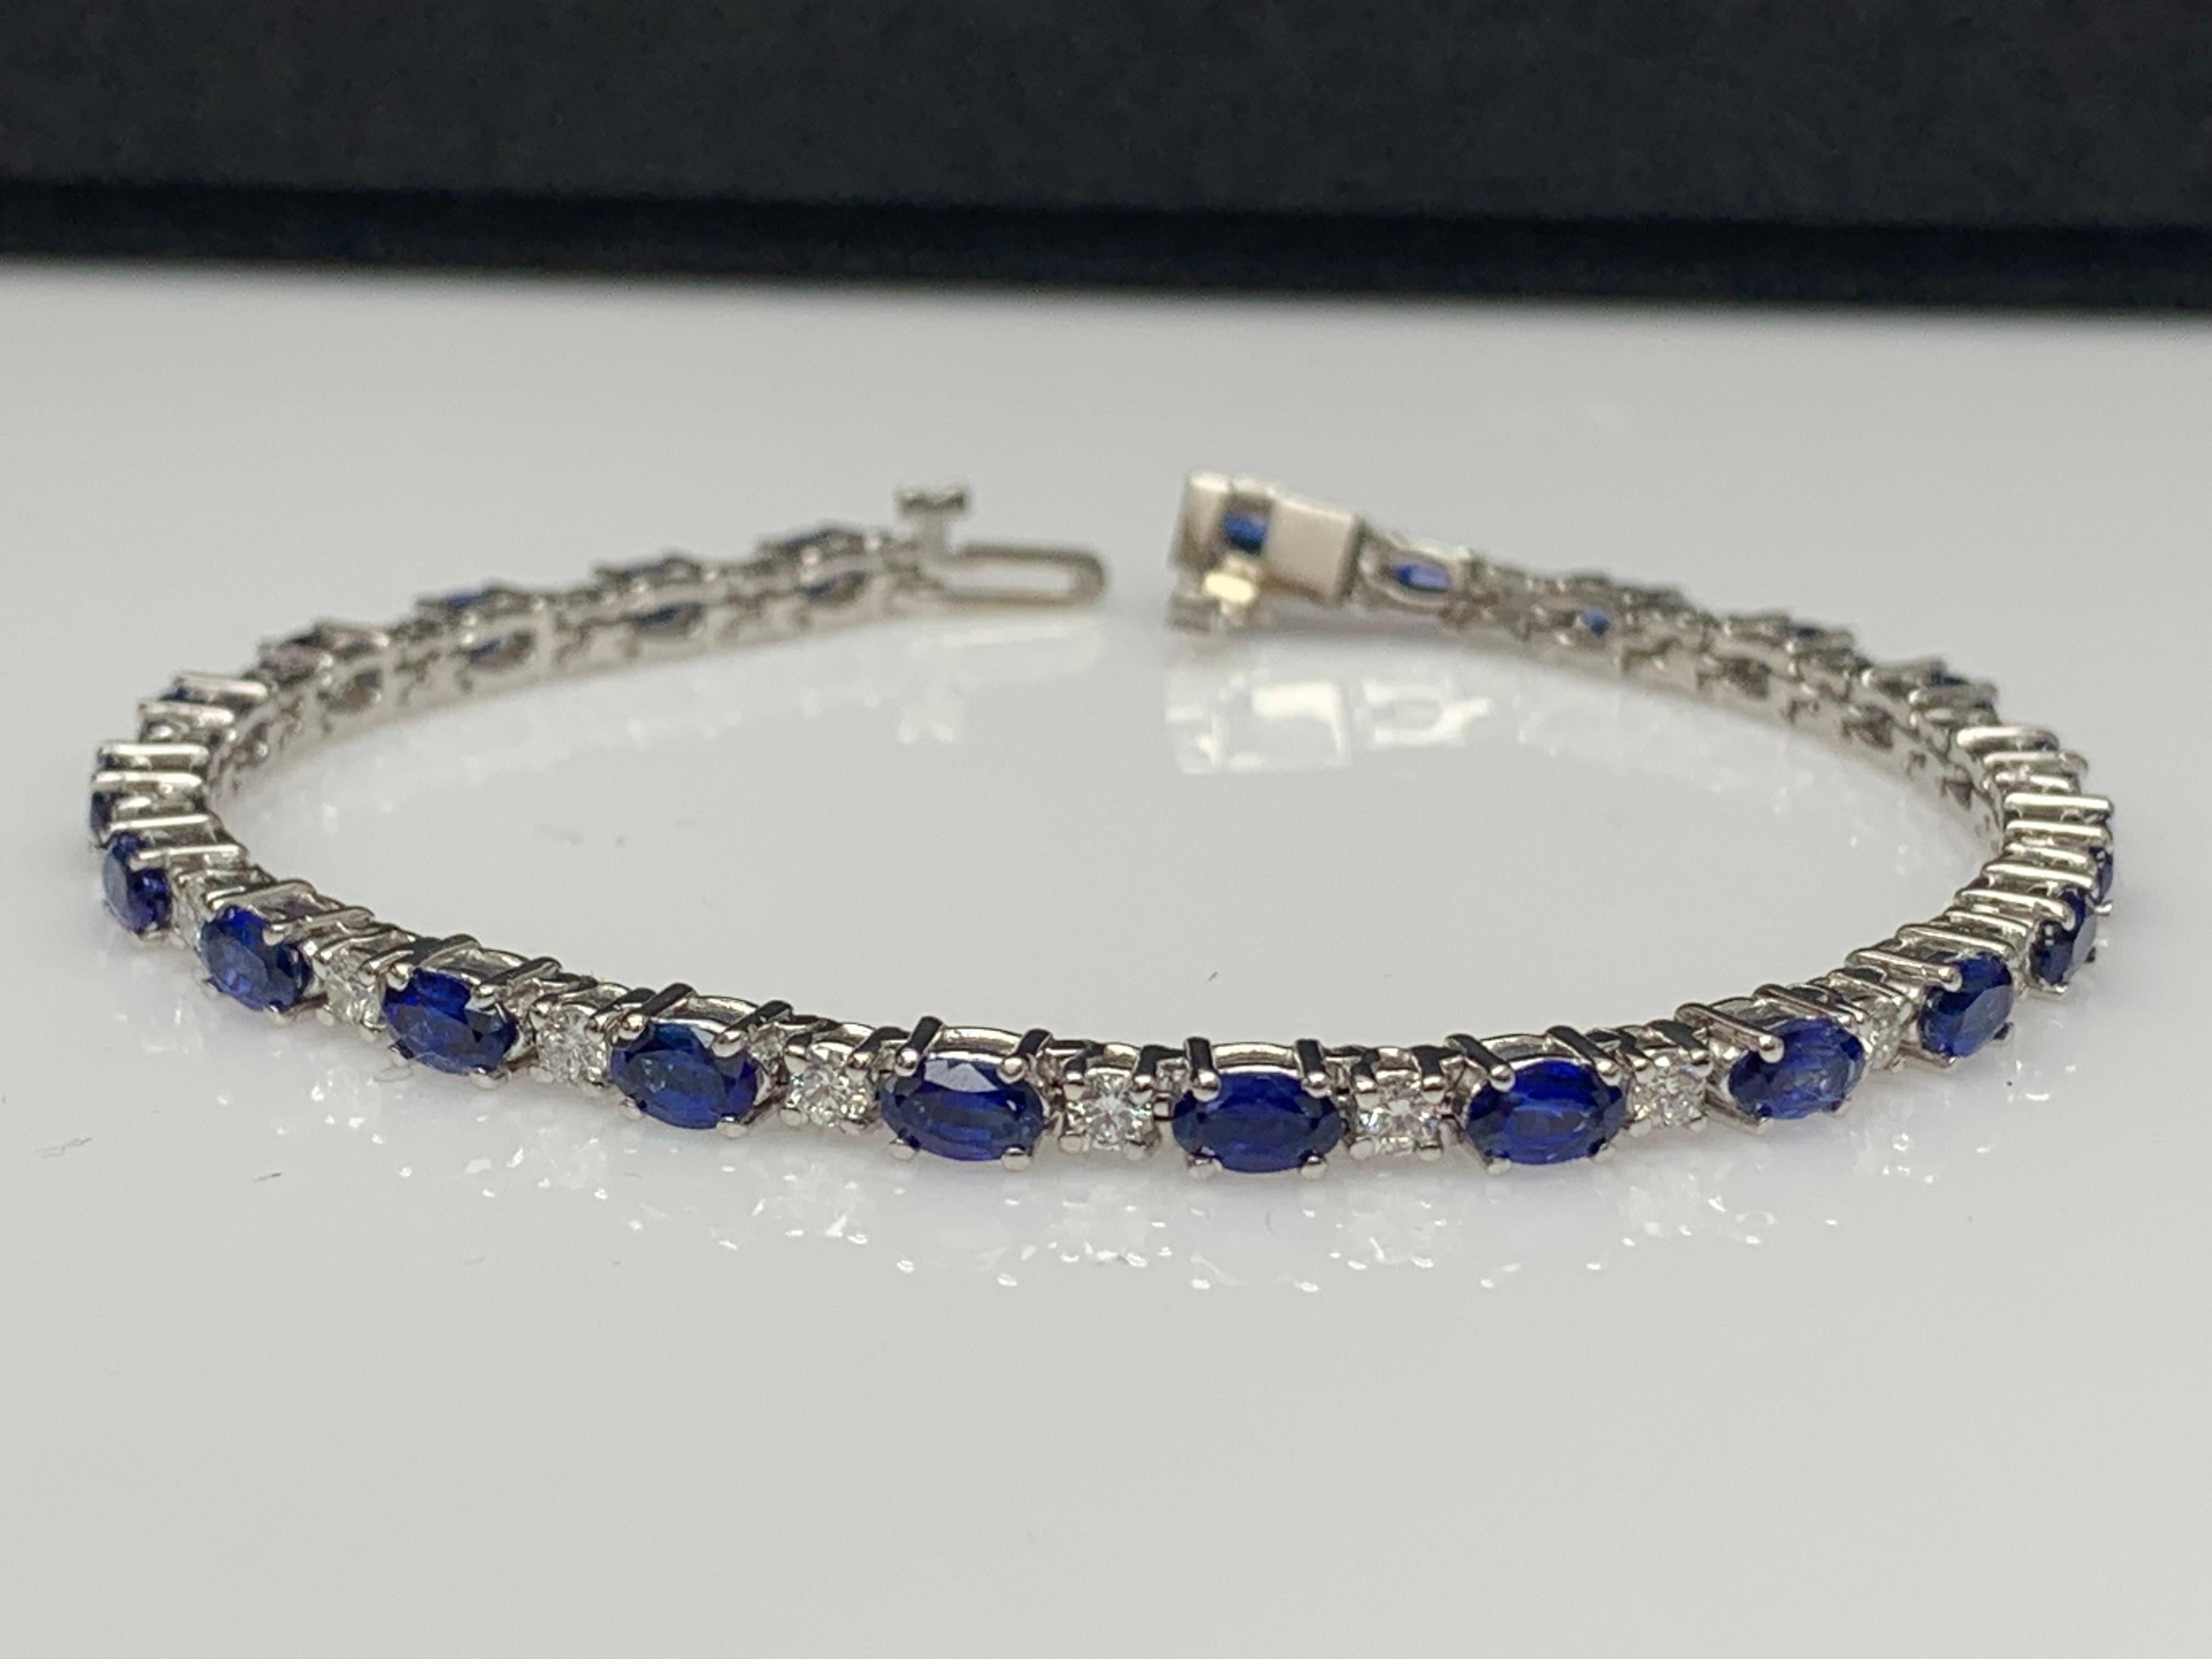 Contemporary 6.01 Carat Blue Sapphire and Diamond Tennis Bracelet in 14K White Gold For Sale